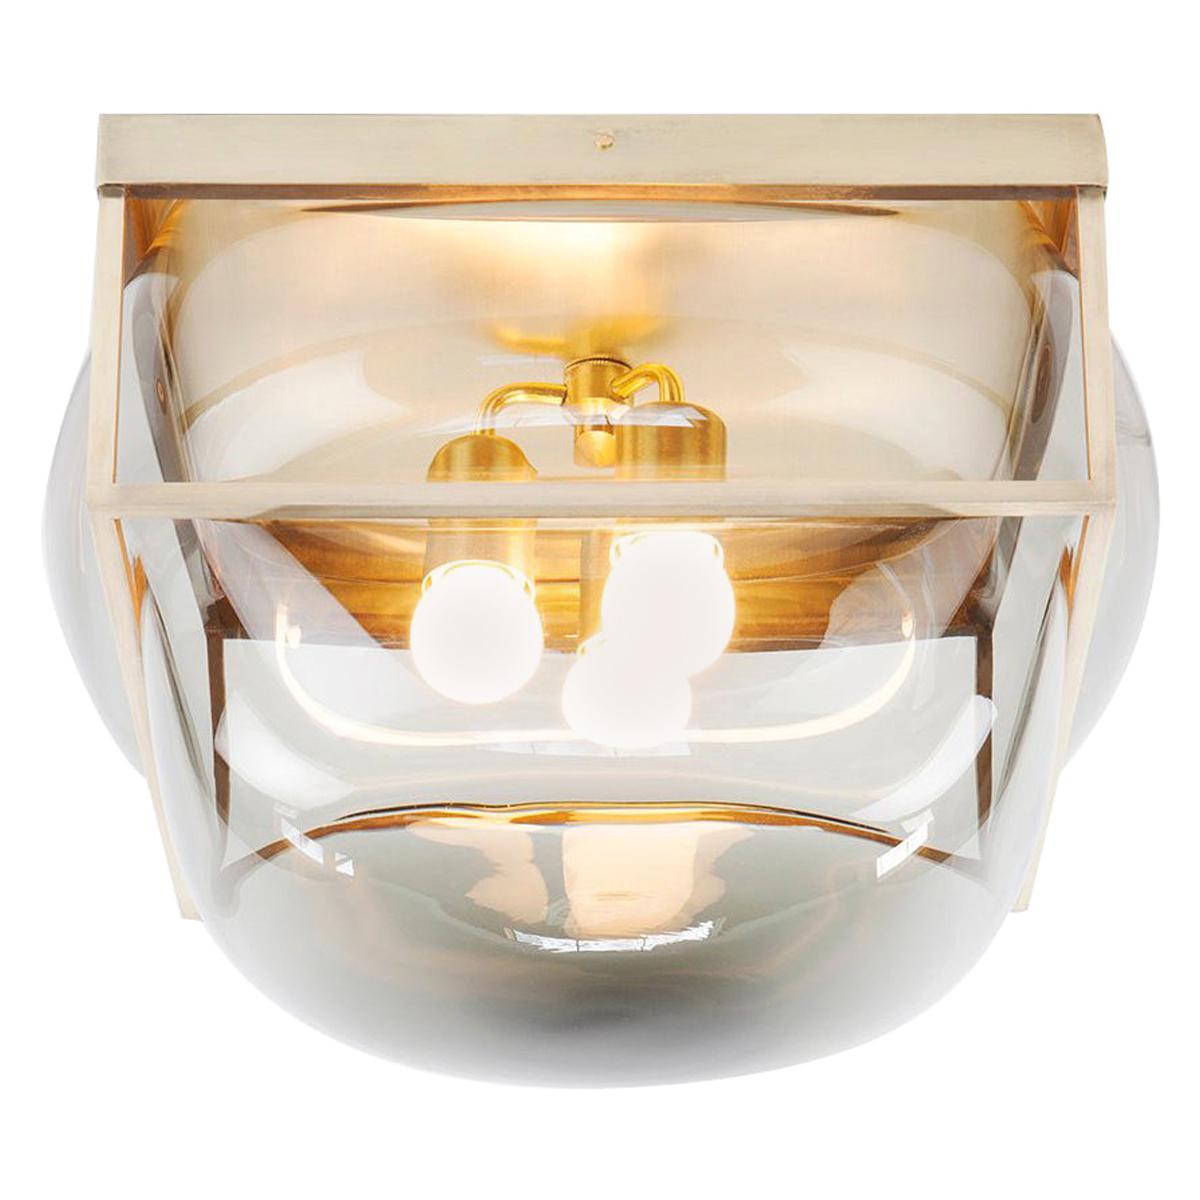 XL Bulle Light with Handblown Glass Solid Brass as Sconce, Flush, or Table Lamp